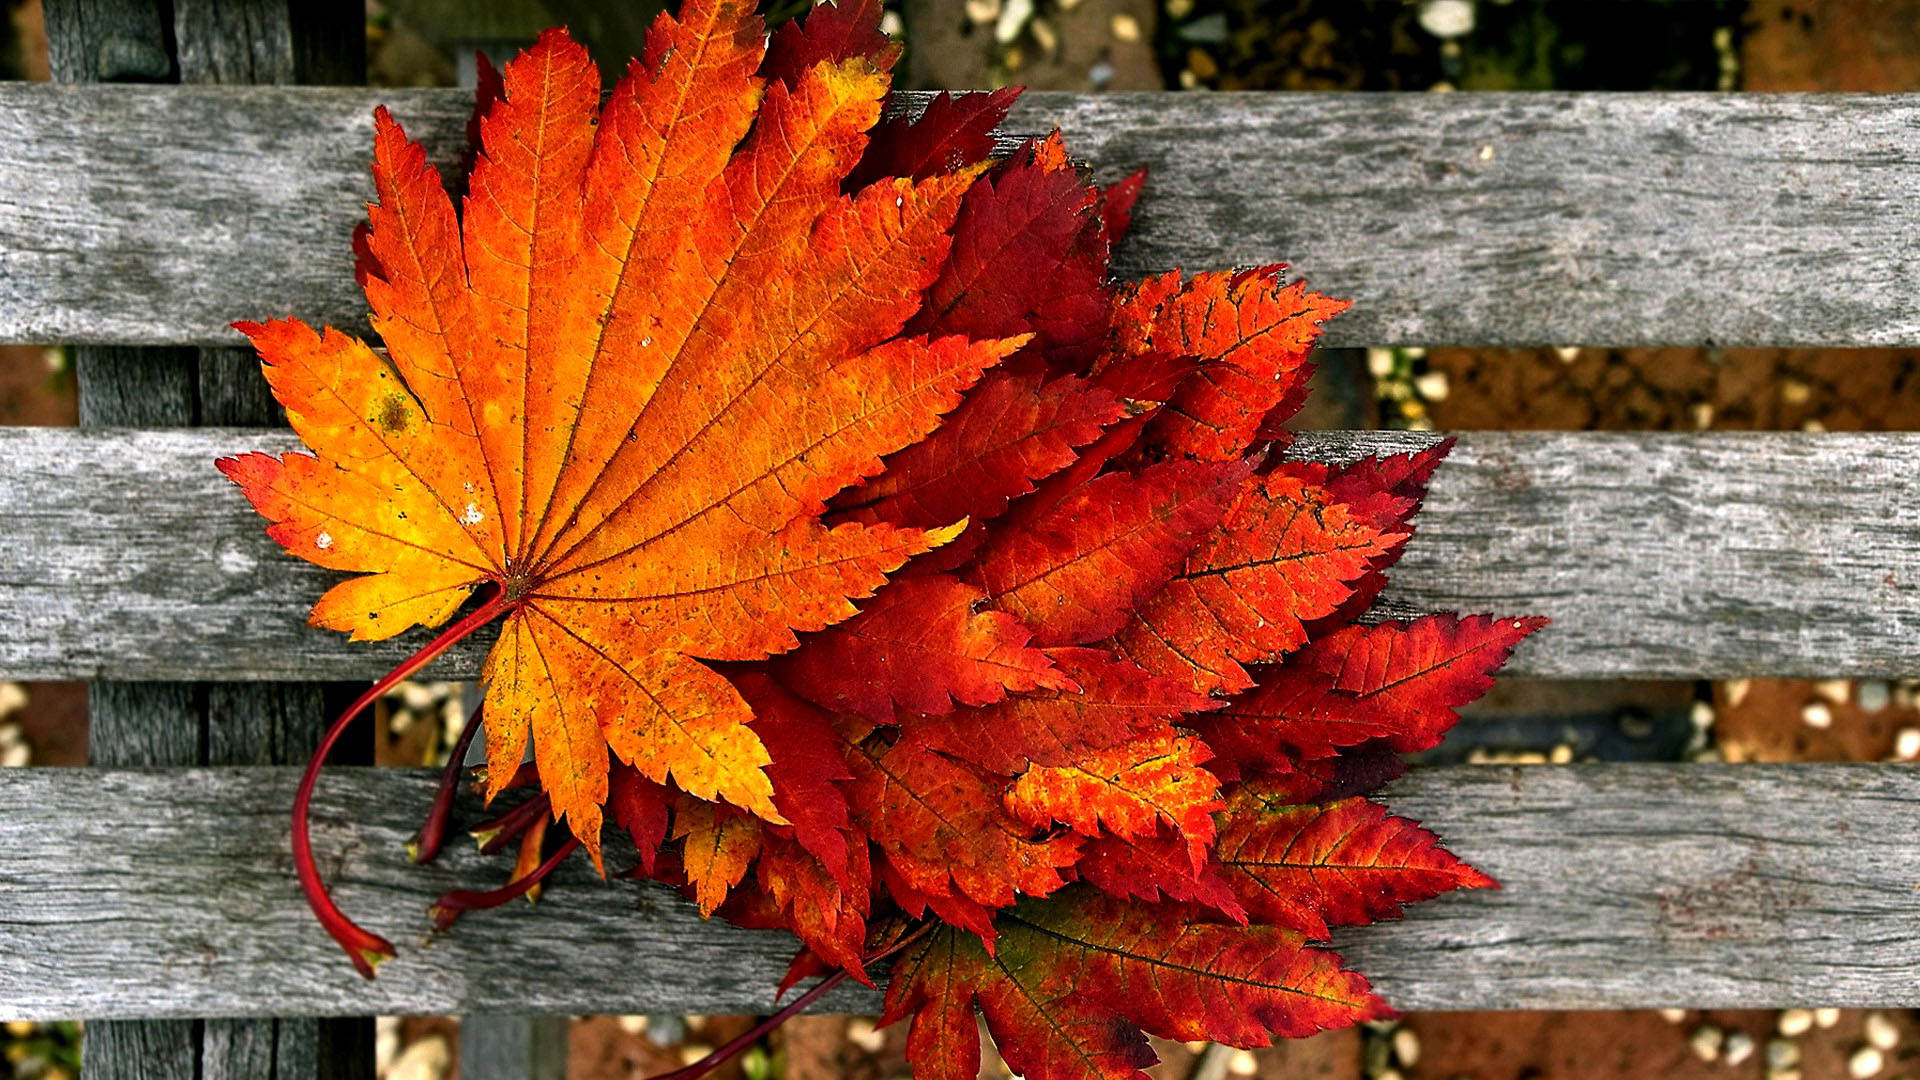 Autumn full hd hdtv fhd 1080p wallpapers hd desktop backgrounds  1920x1080 images and pictures